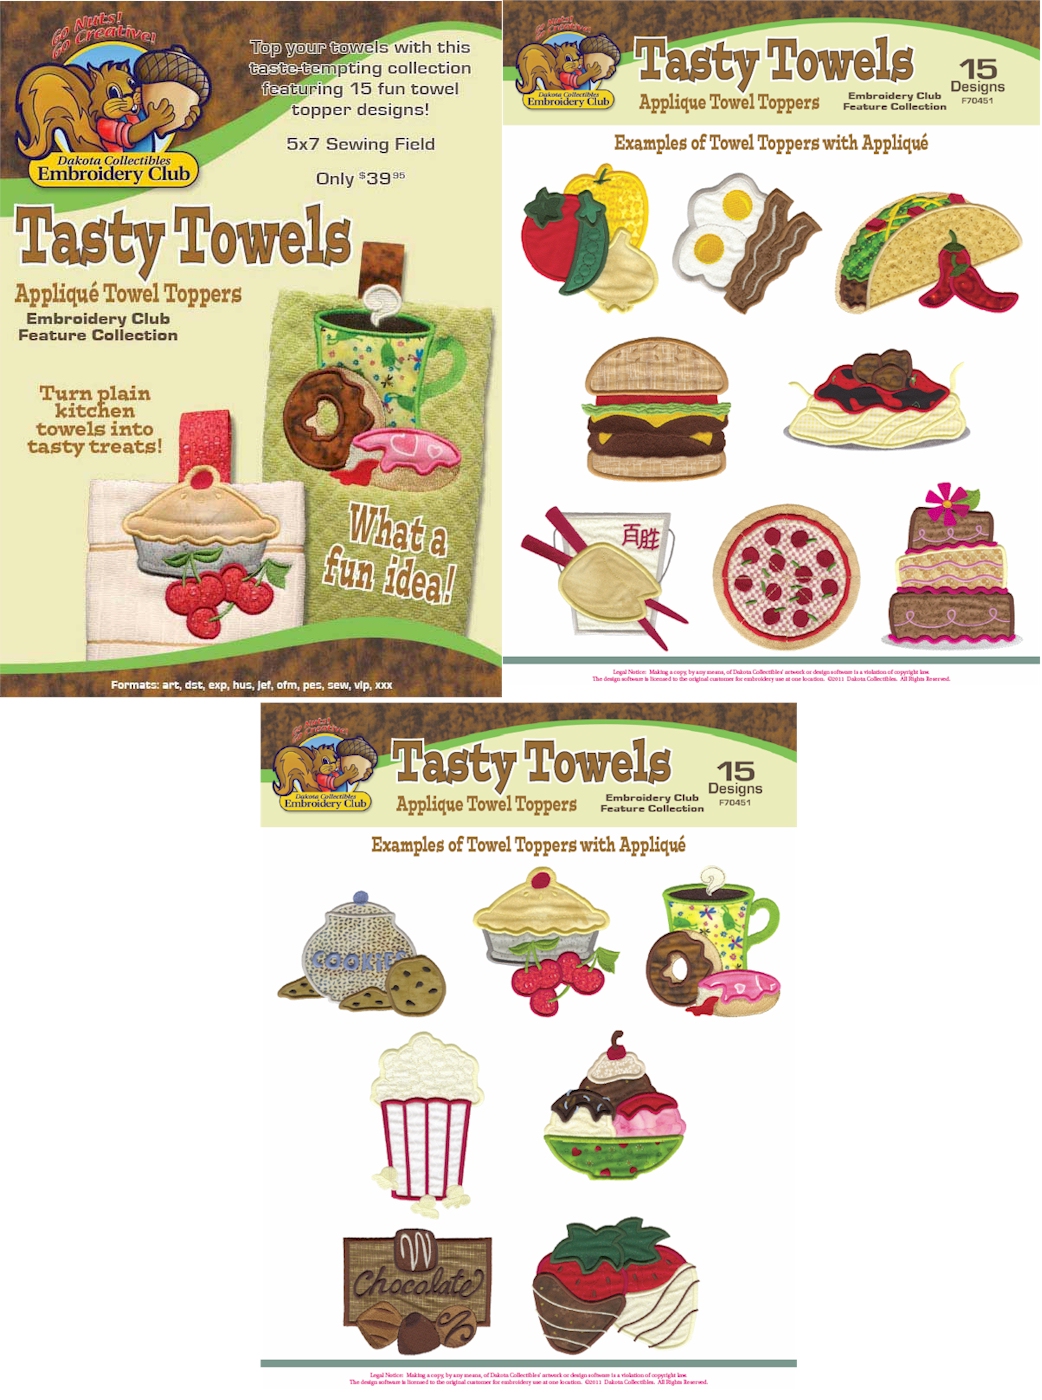 Tasty Towels Applique Towel Toppers Embroidery Designs by Dakota Collectibles on Multi-Format CD-ROM F70451